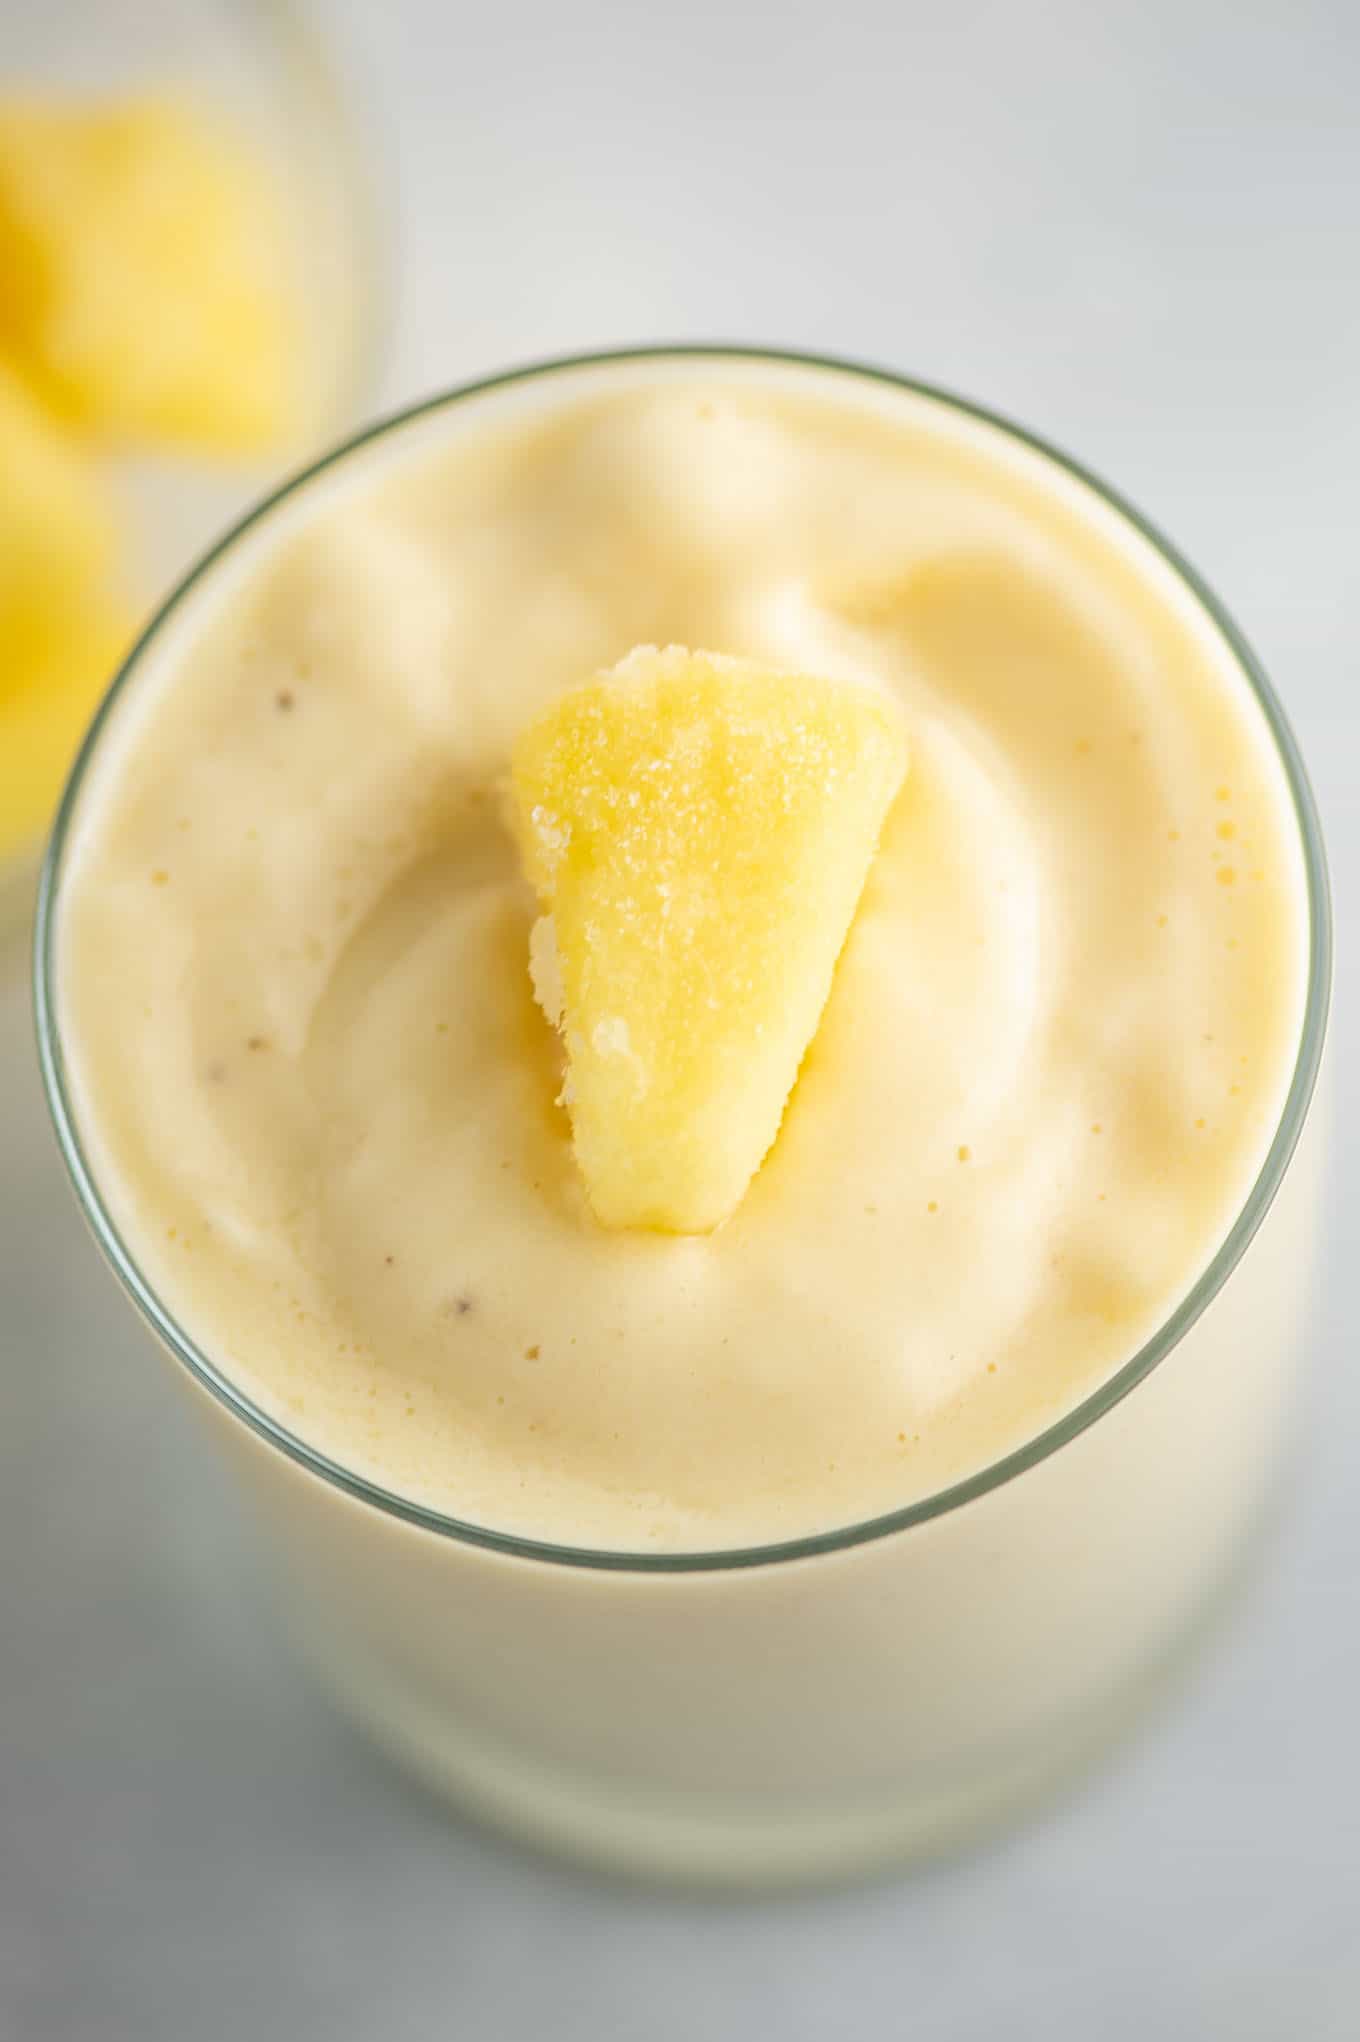 frozen pineapple on top of the pineapple smoothie